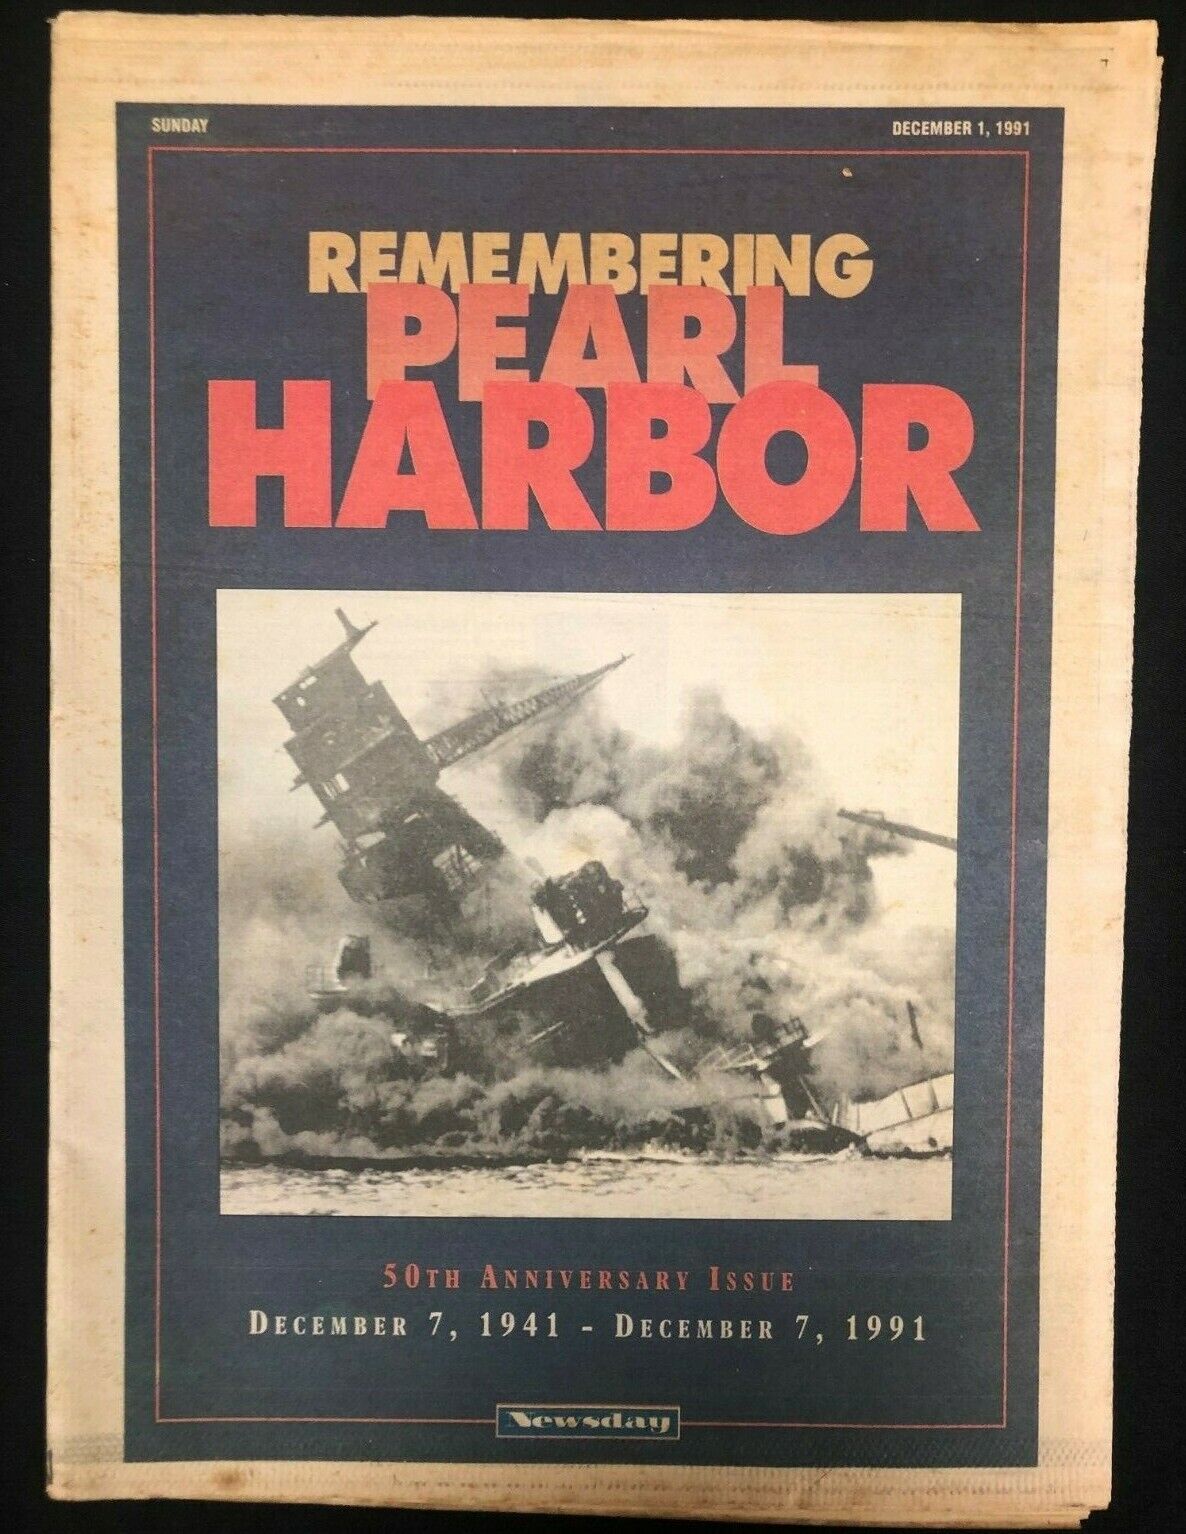 1991 DEC 1 NEWSDAY NEWSPAPER *PEARL HARBOR 50TH ANNIVERSARY ISSUE*  PGS 1-32